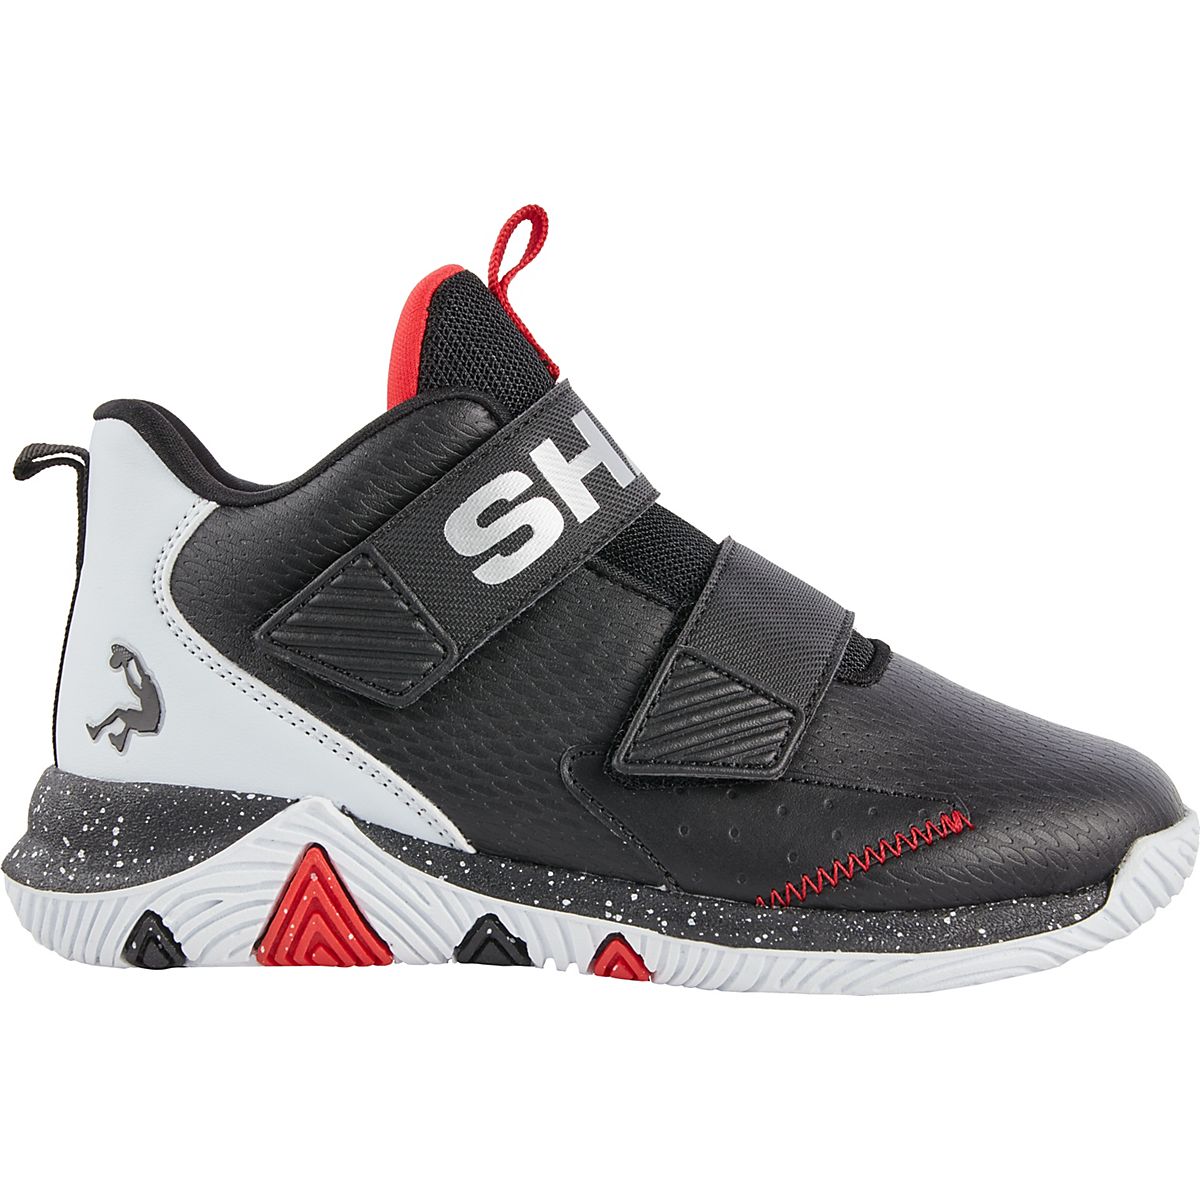 Shaq Boys' Youth Composite Shoes | Free Shipping at Academy